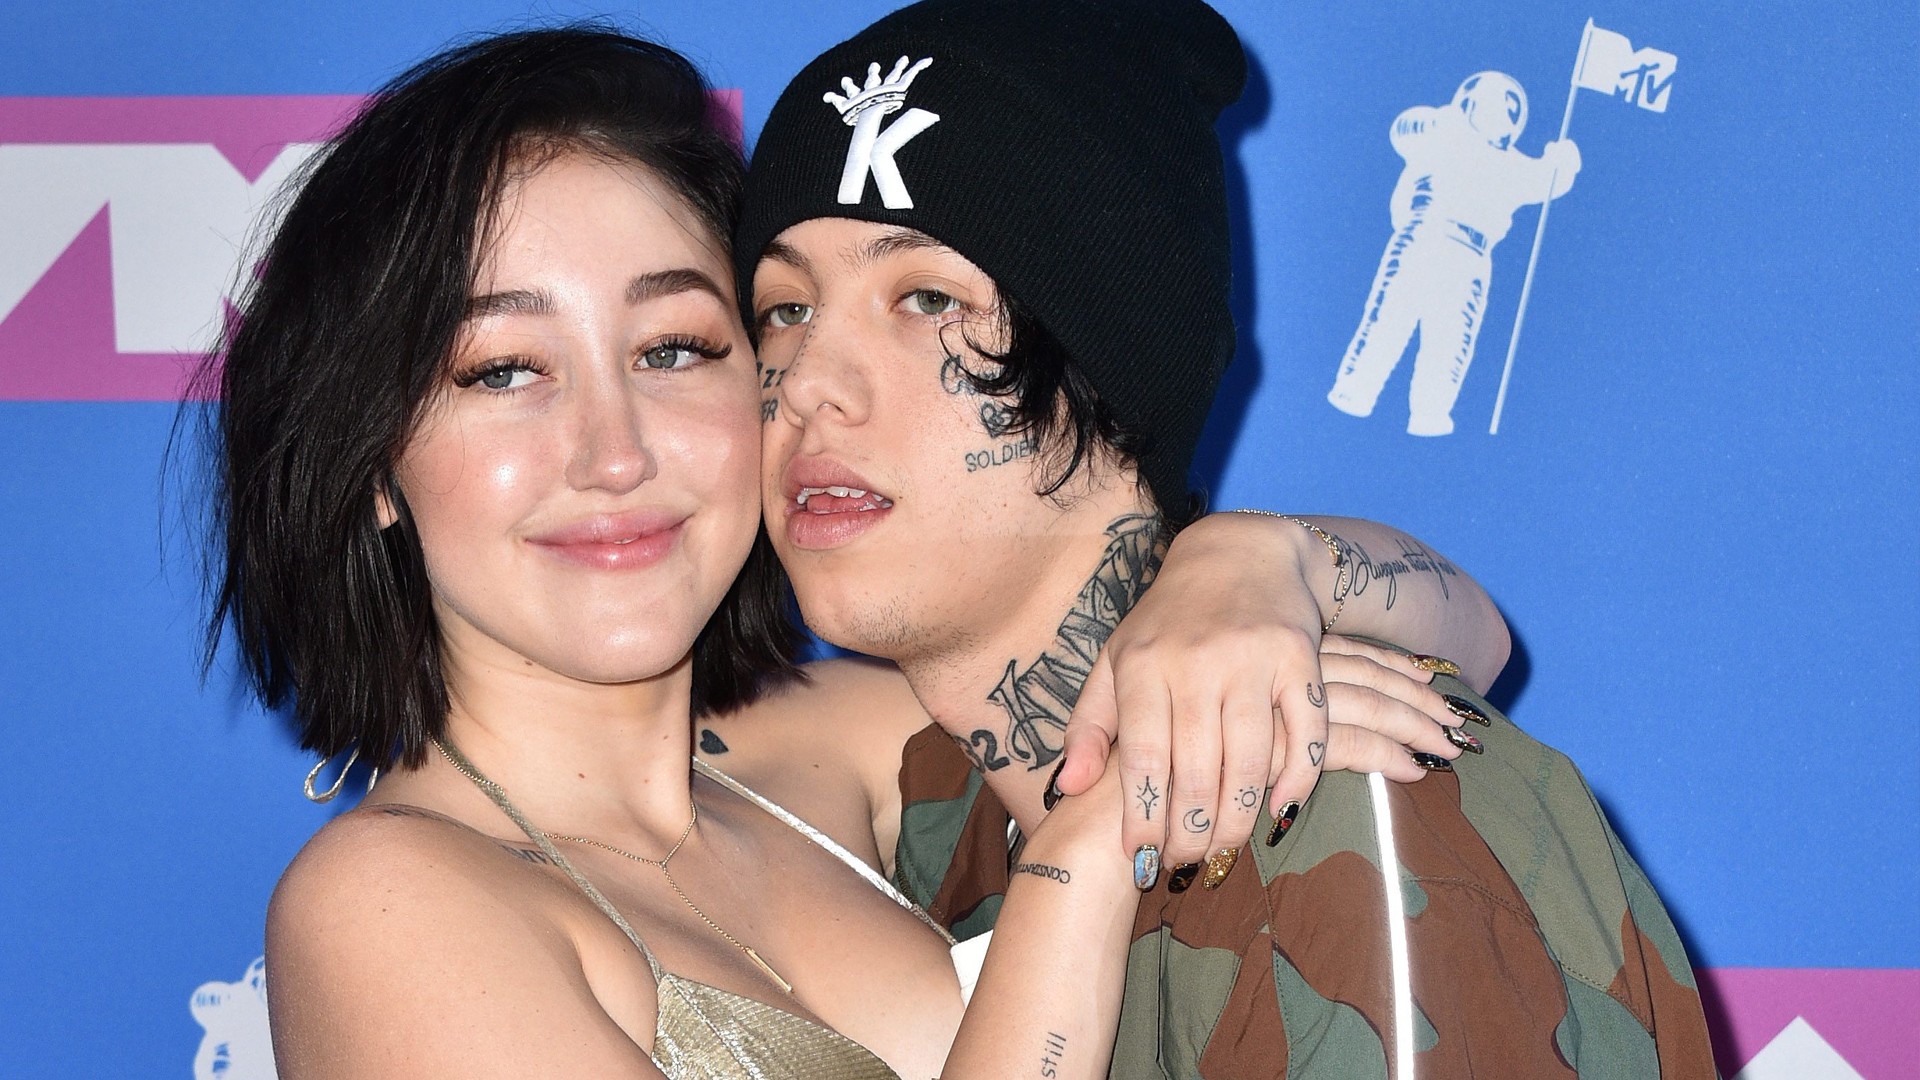 Billy Ray Cyrus Pornhub - Noah Cyrus and Lil Xan's Breakup Is a Hot Mess and I Can't Look Away